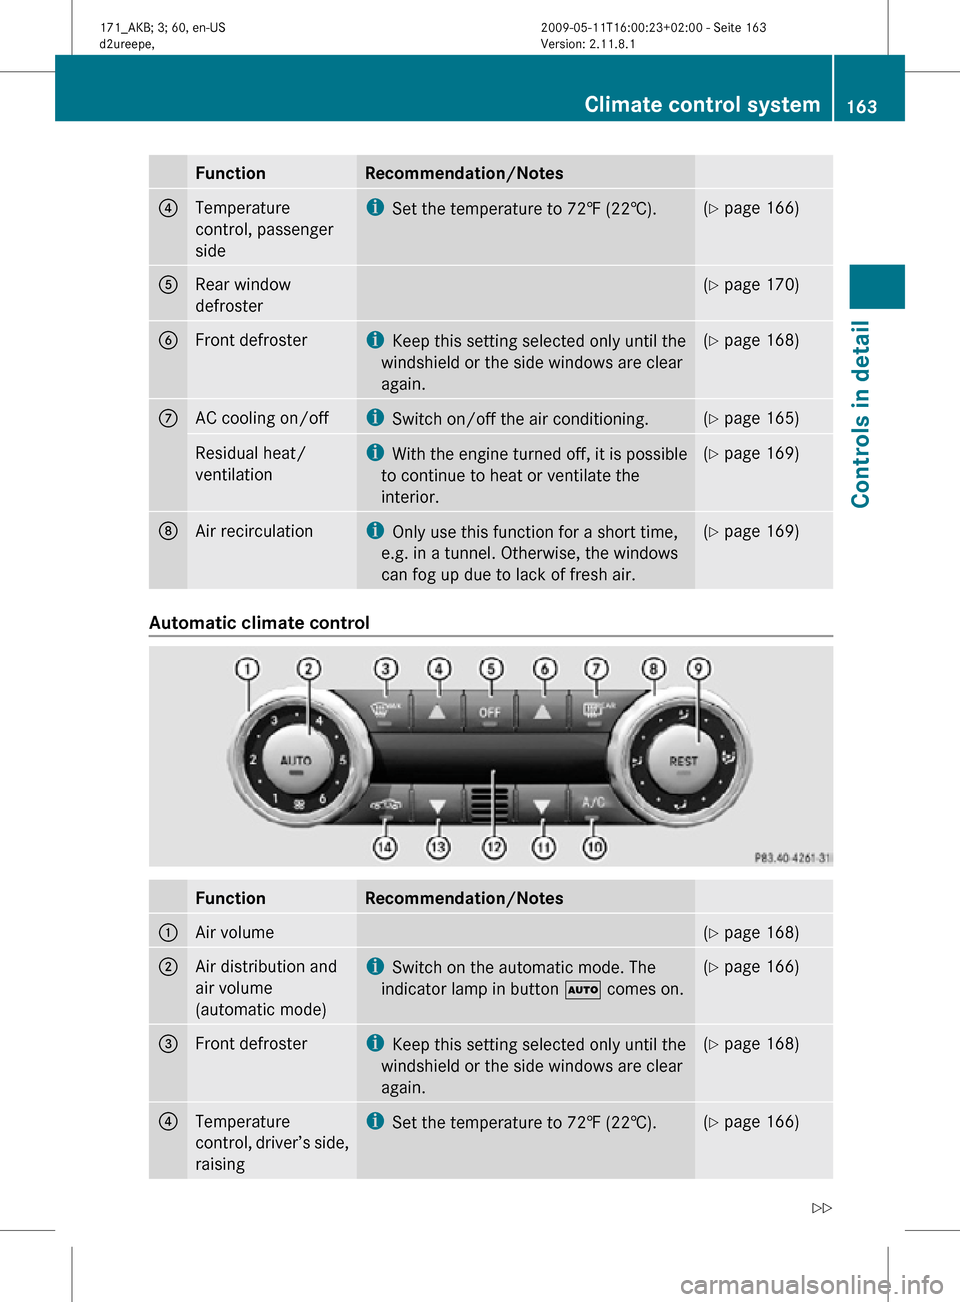 MERCEDES-BENZ SLK300 2011 R170 Owners Manual Function Recommendation/Notes
4
Temperature
control, passenger
side i
Set the temperature to 72‡ (22†). (Y page 166)
5
Rear window
defroster (Y page 170)
6
Front defroster i
Keep this setting sele